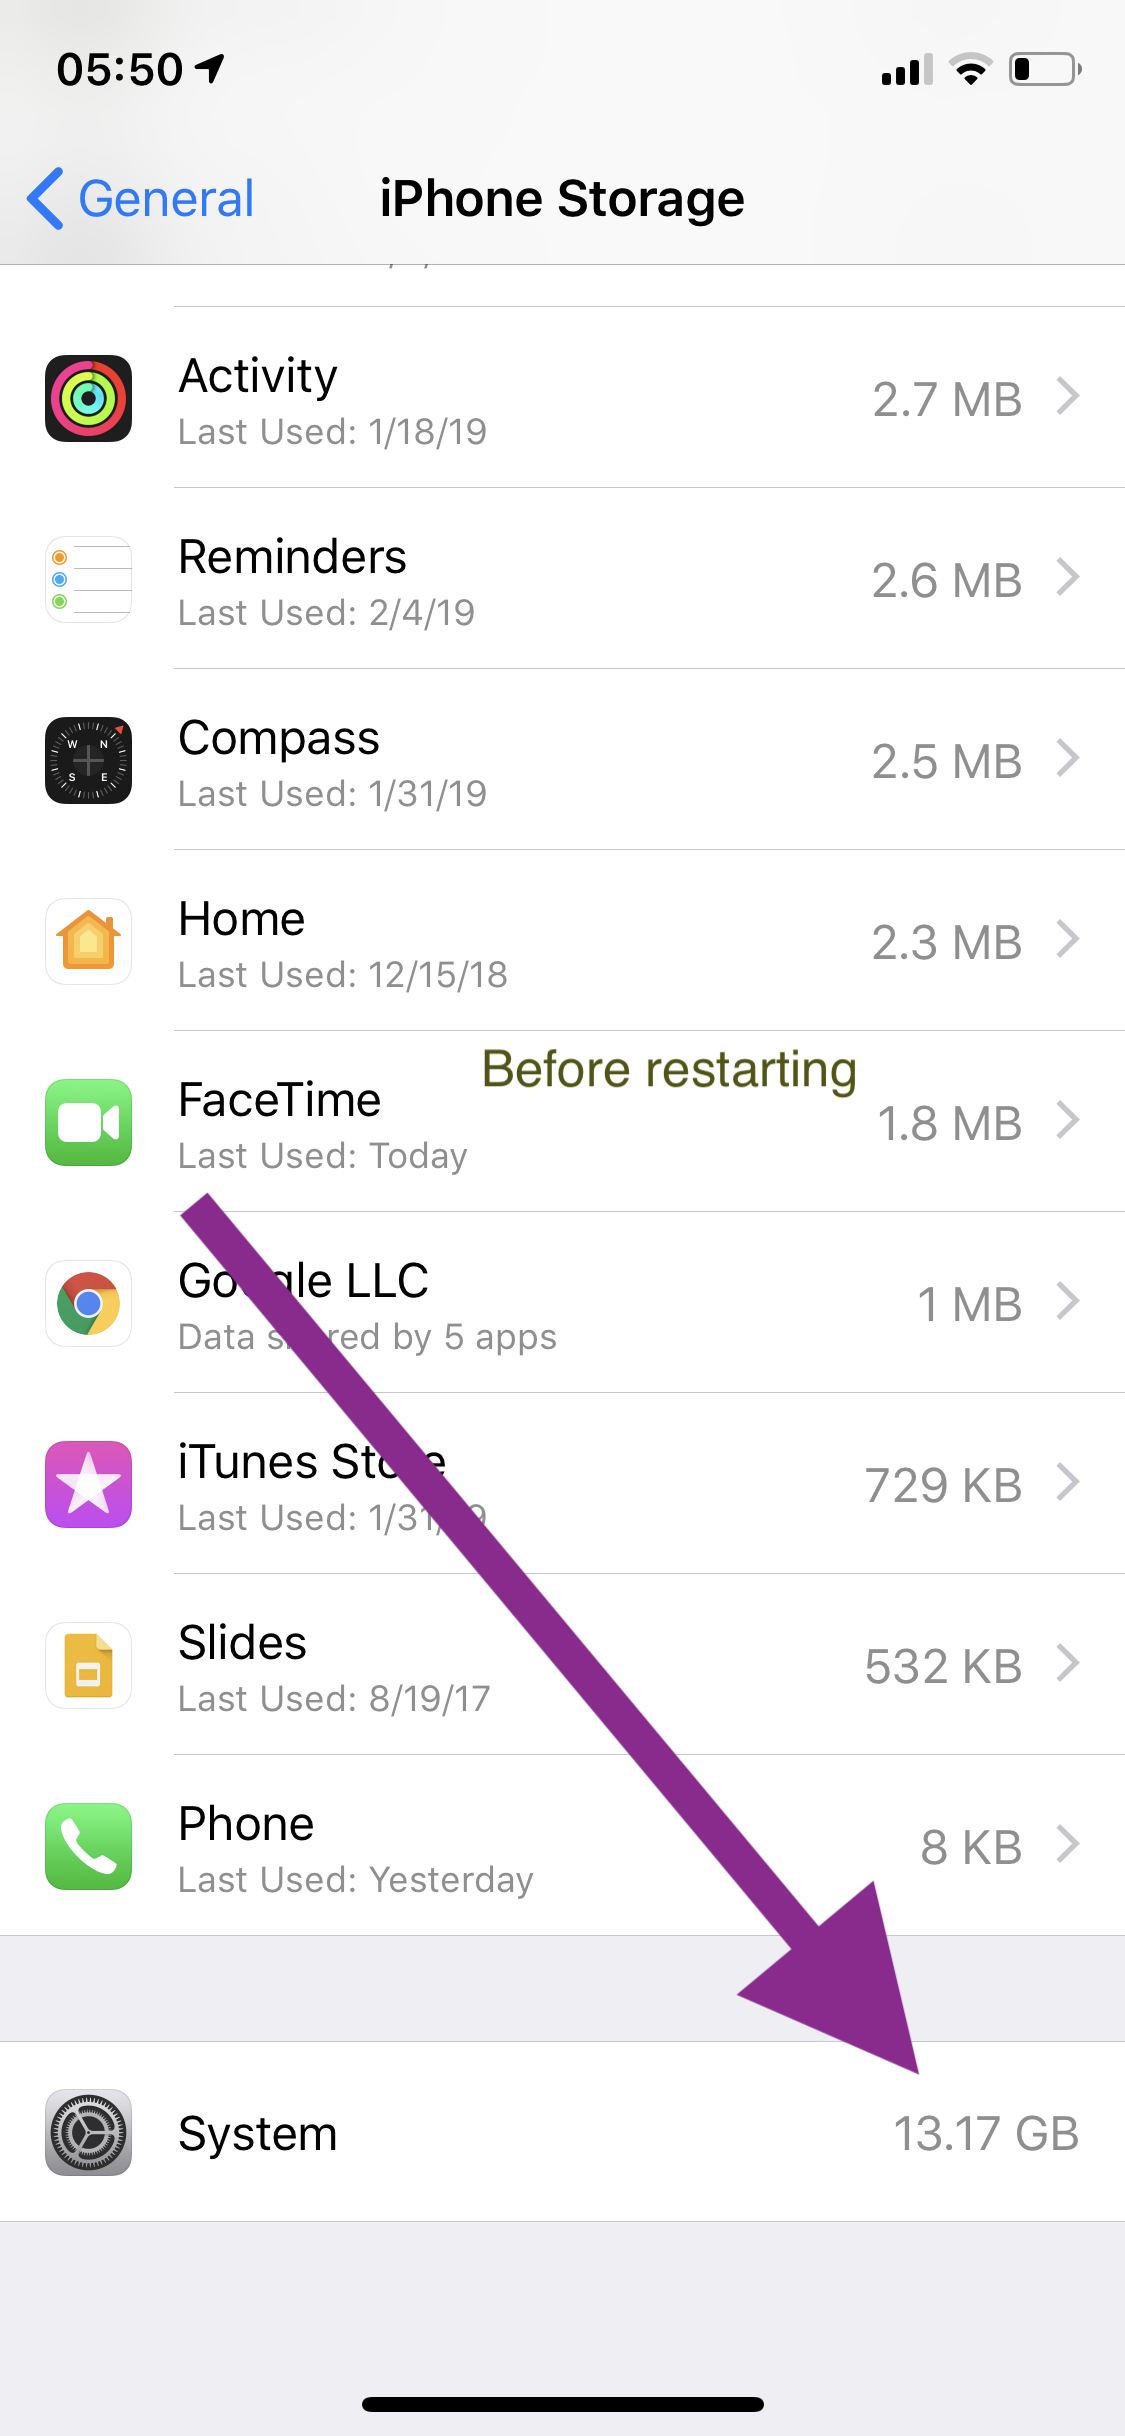 minitool mobile recovery iphone not enough space to save device files